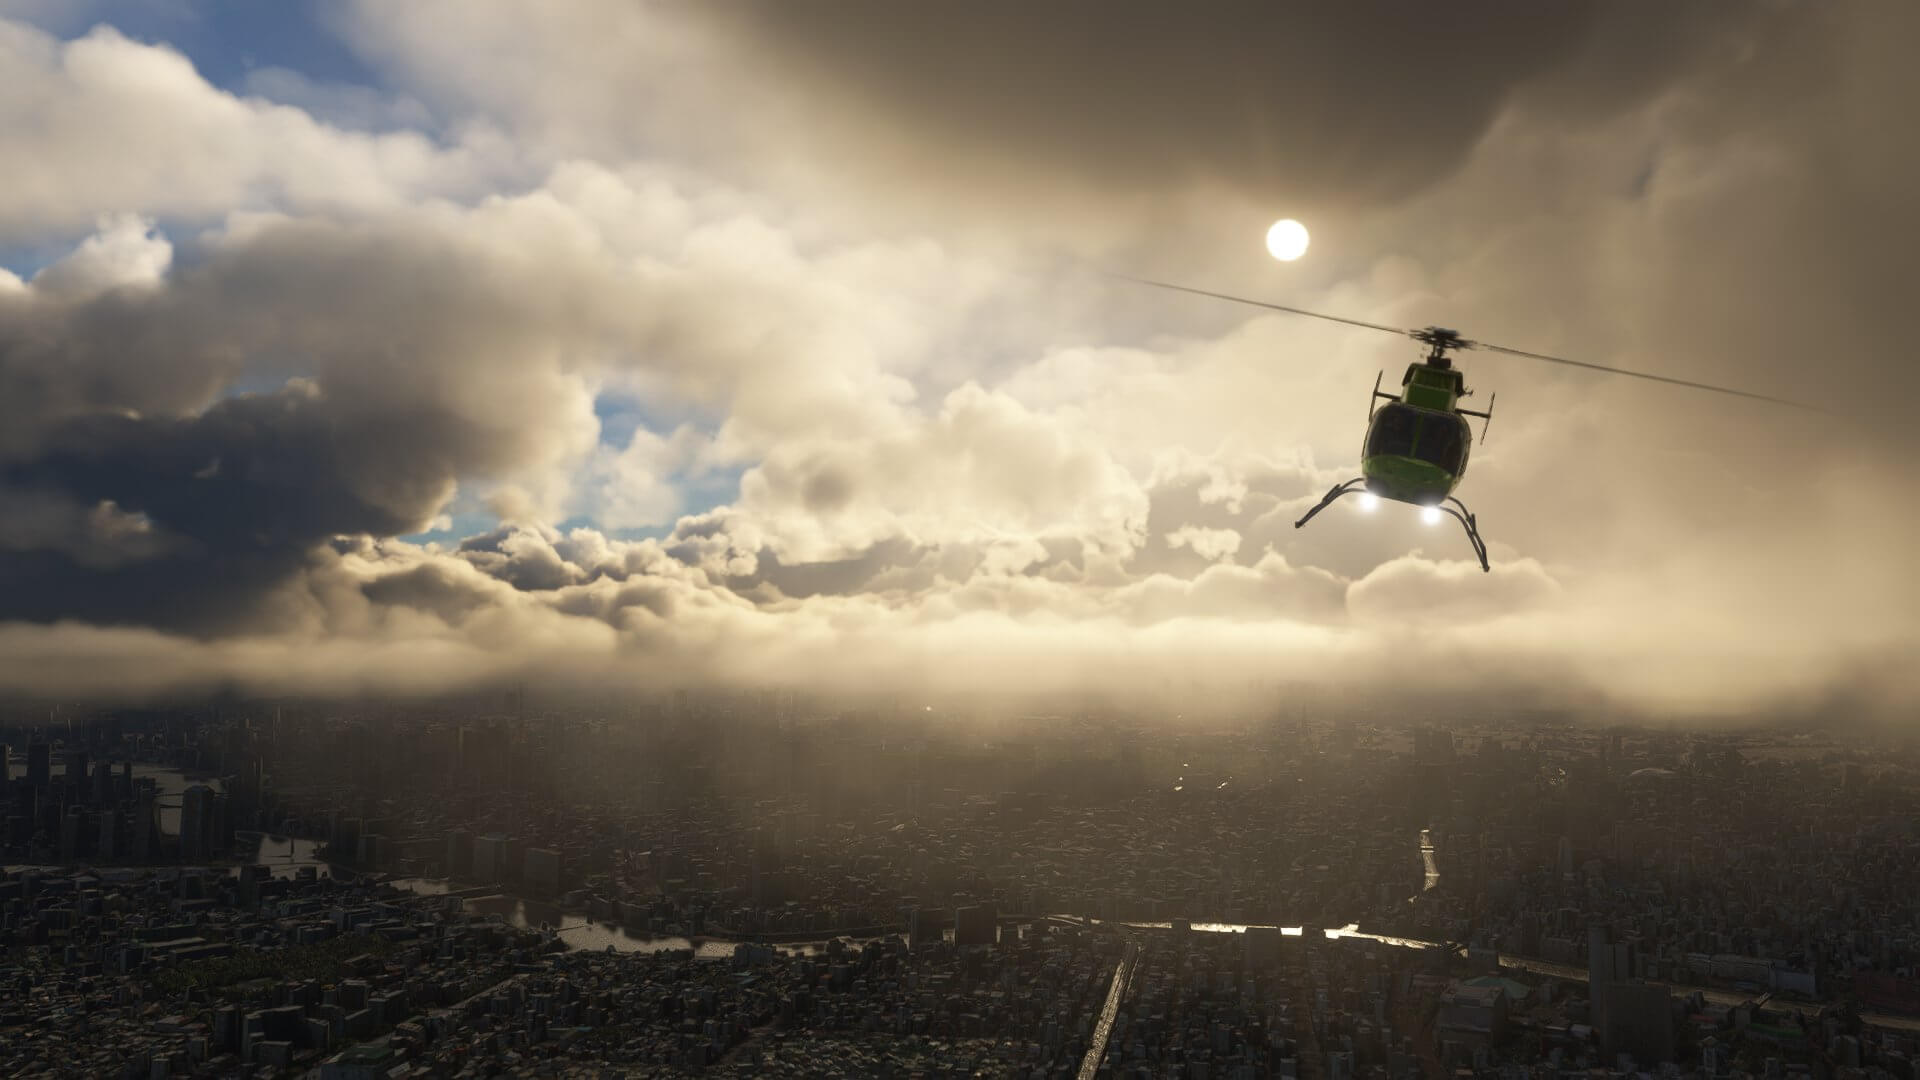 A green helicopter with landing lights turned on flies above a dense city, with the sun reflecting back off of large cloud build ups nearby.